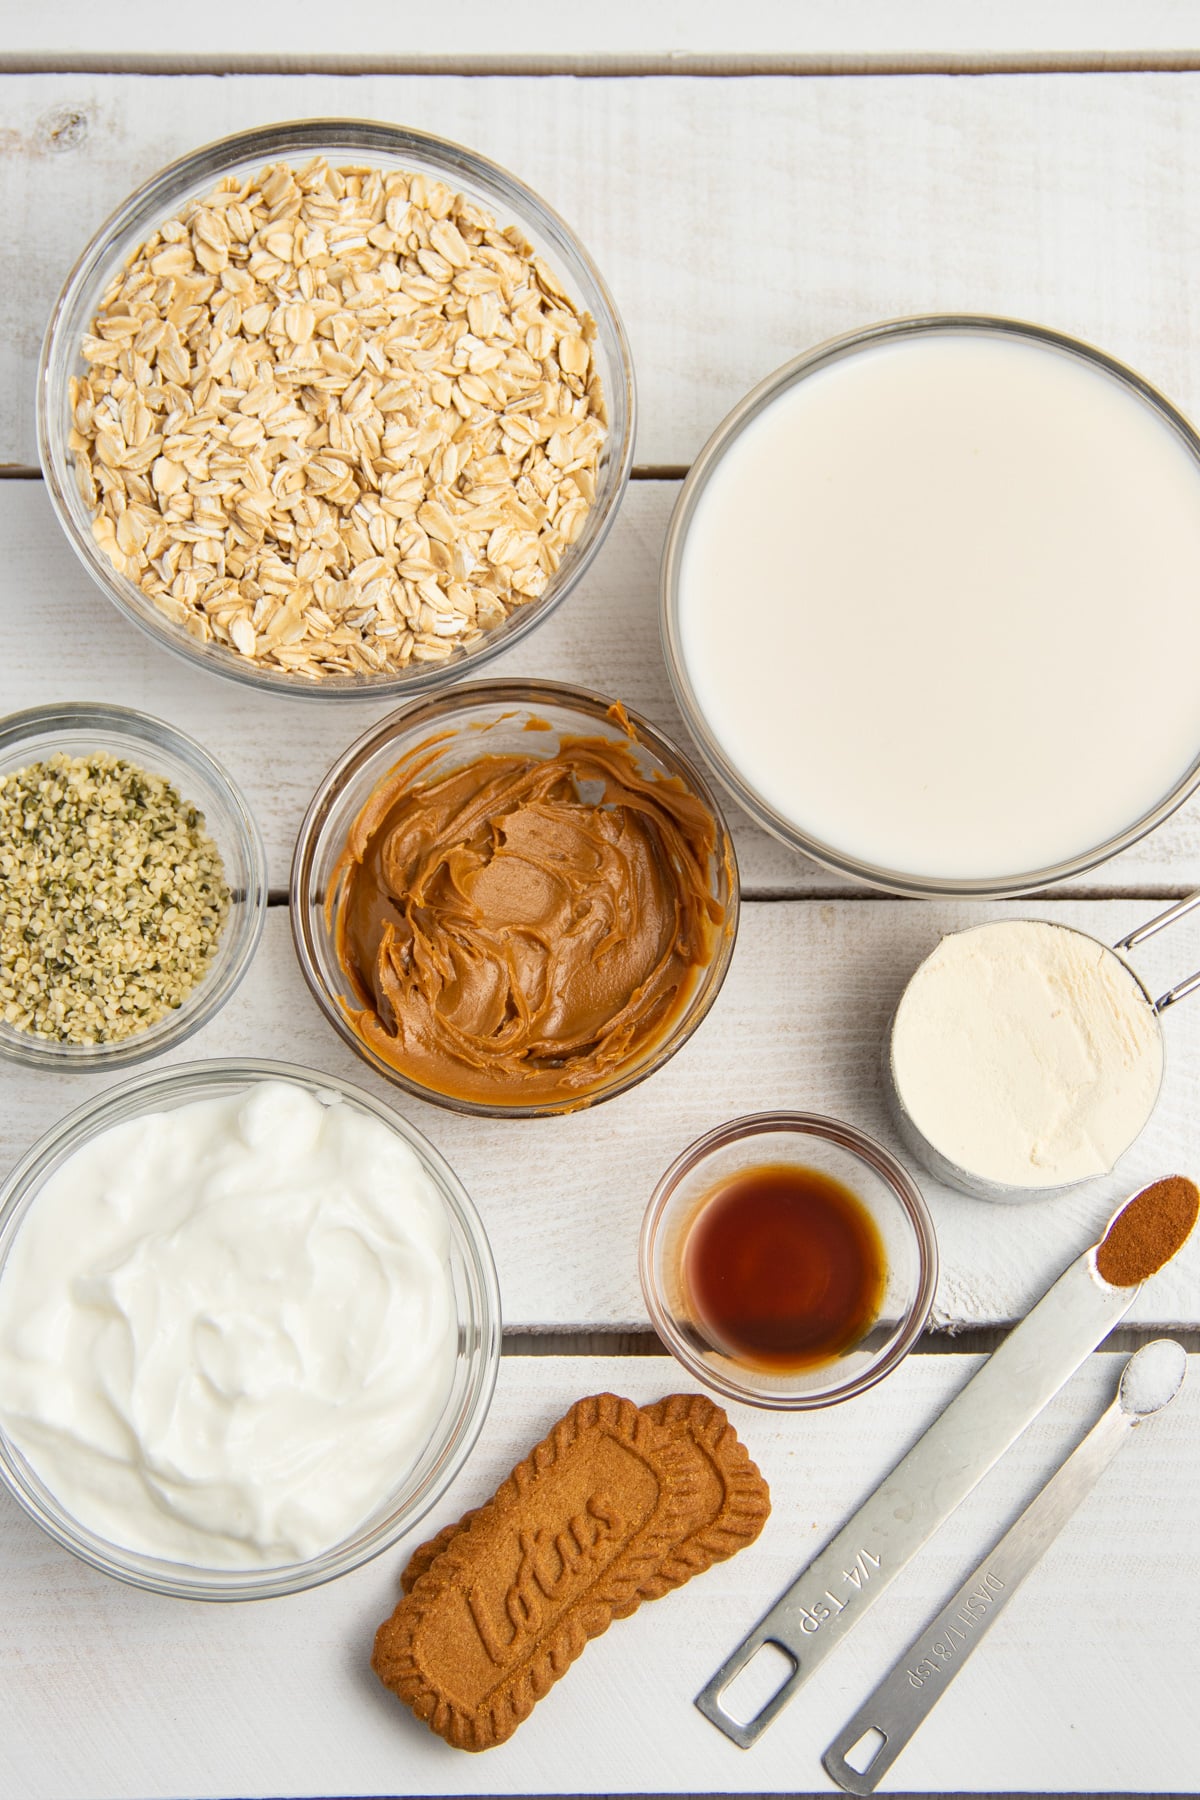 This is a picture of all the ingredients used to make these cookie butter oats.